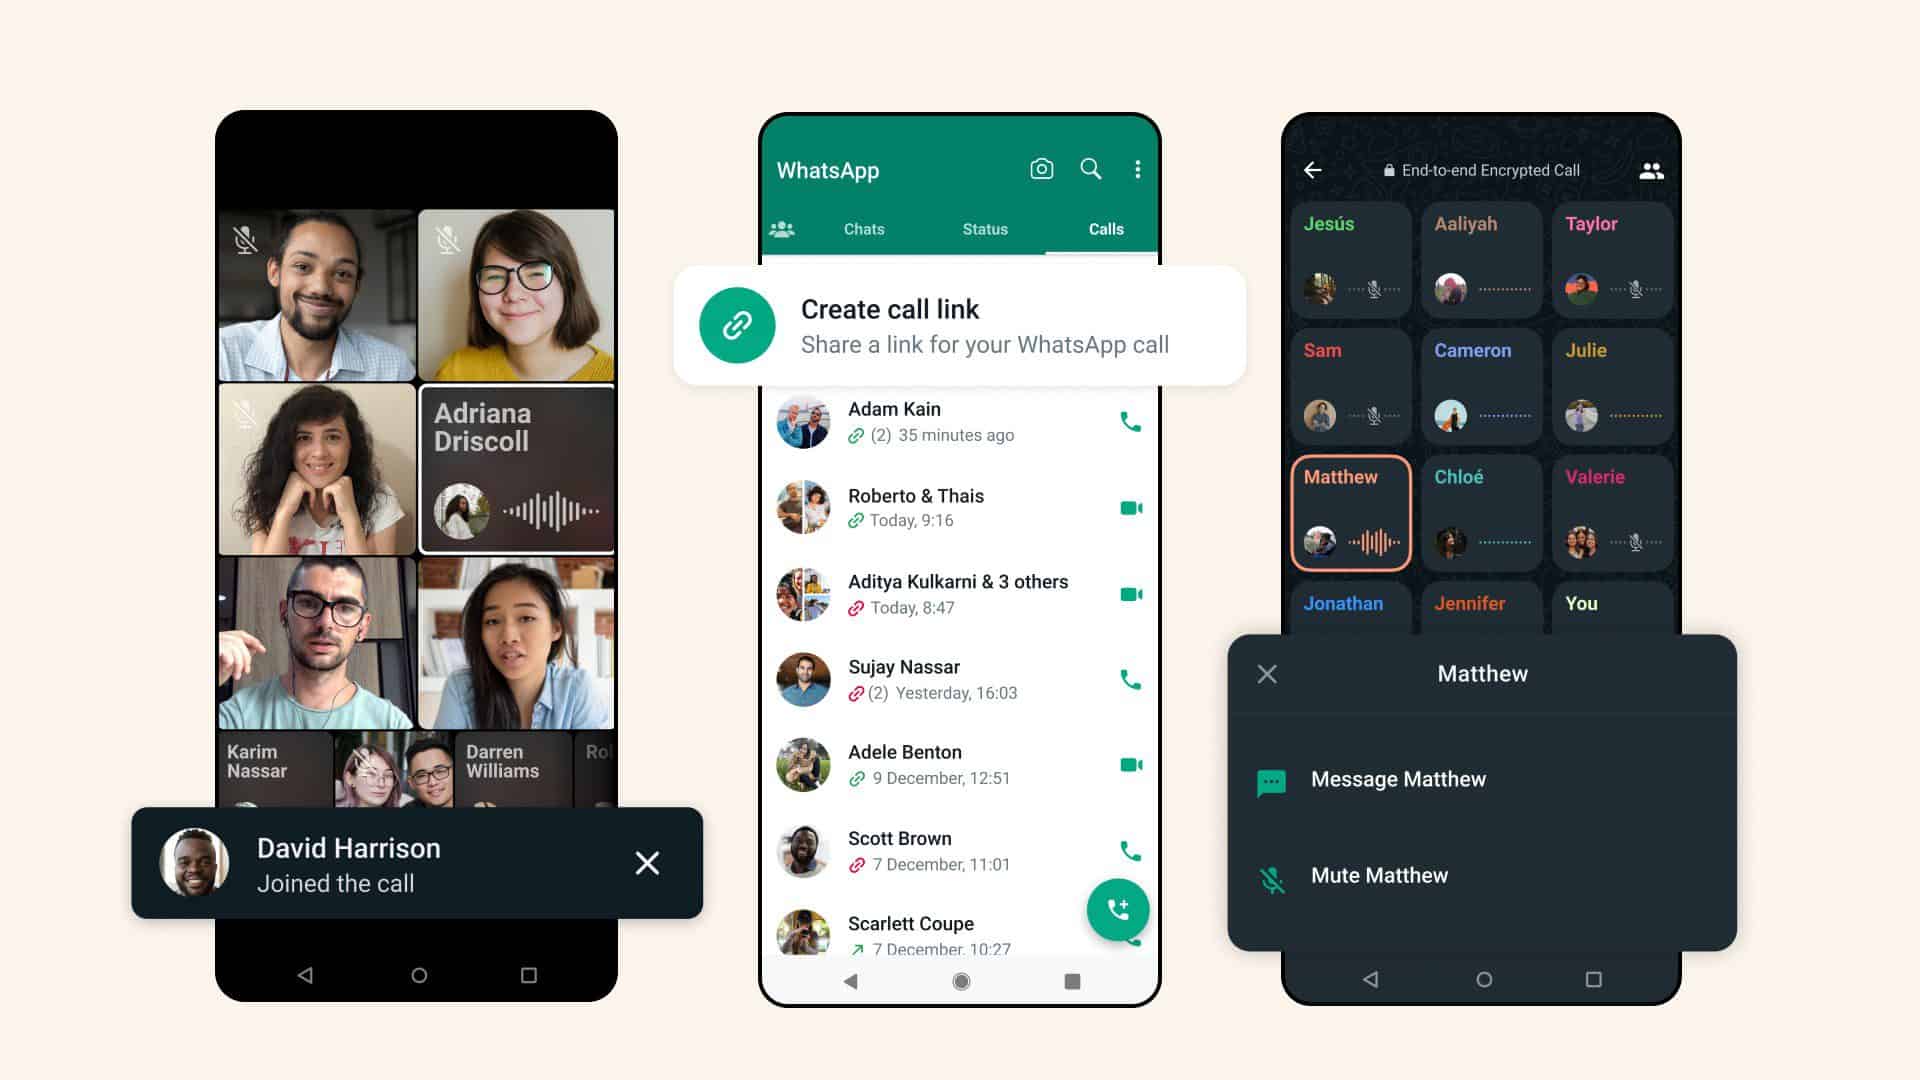 Here is how WhatsApp improved its calling experience